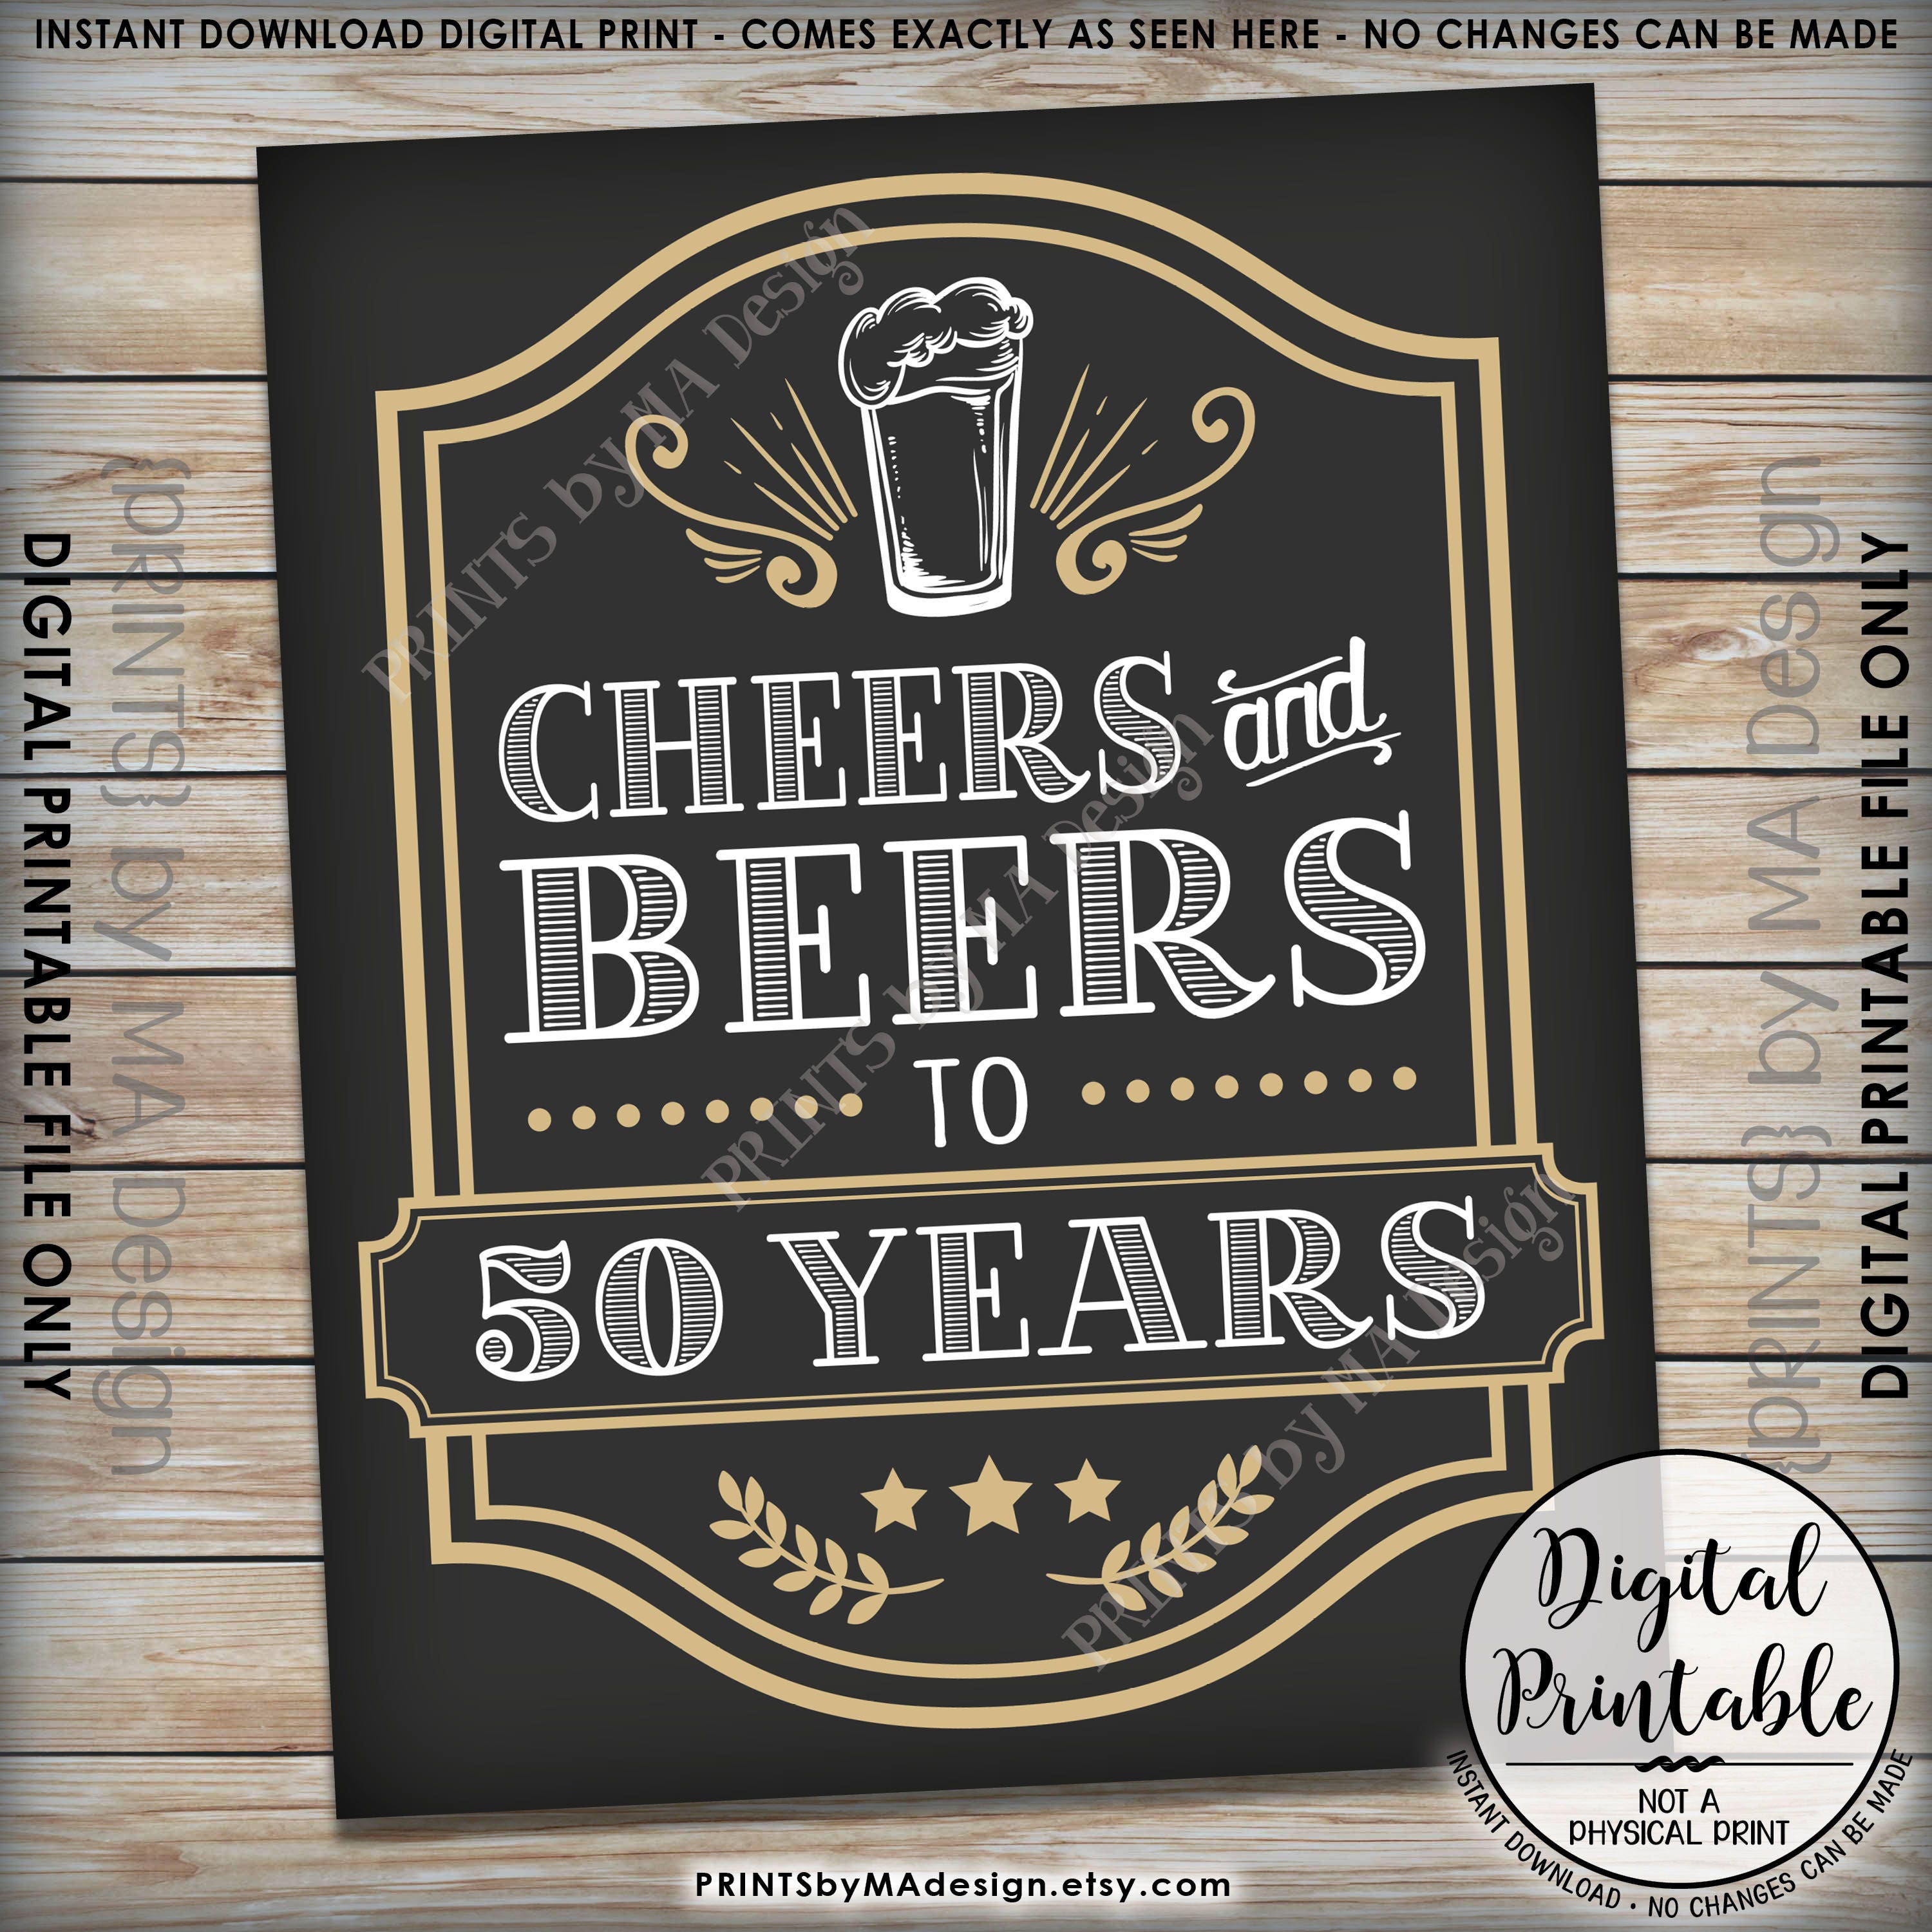 Download Cheers and Beers to 50 Years, Cheers to 50th B-day, Cheers ...